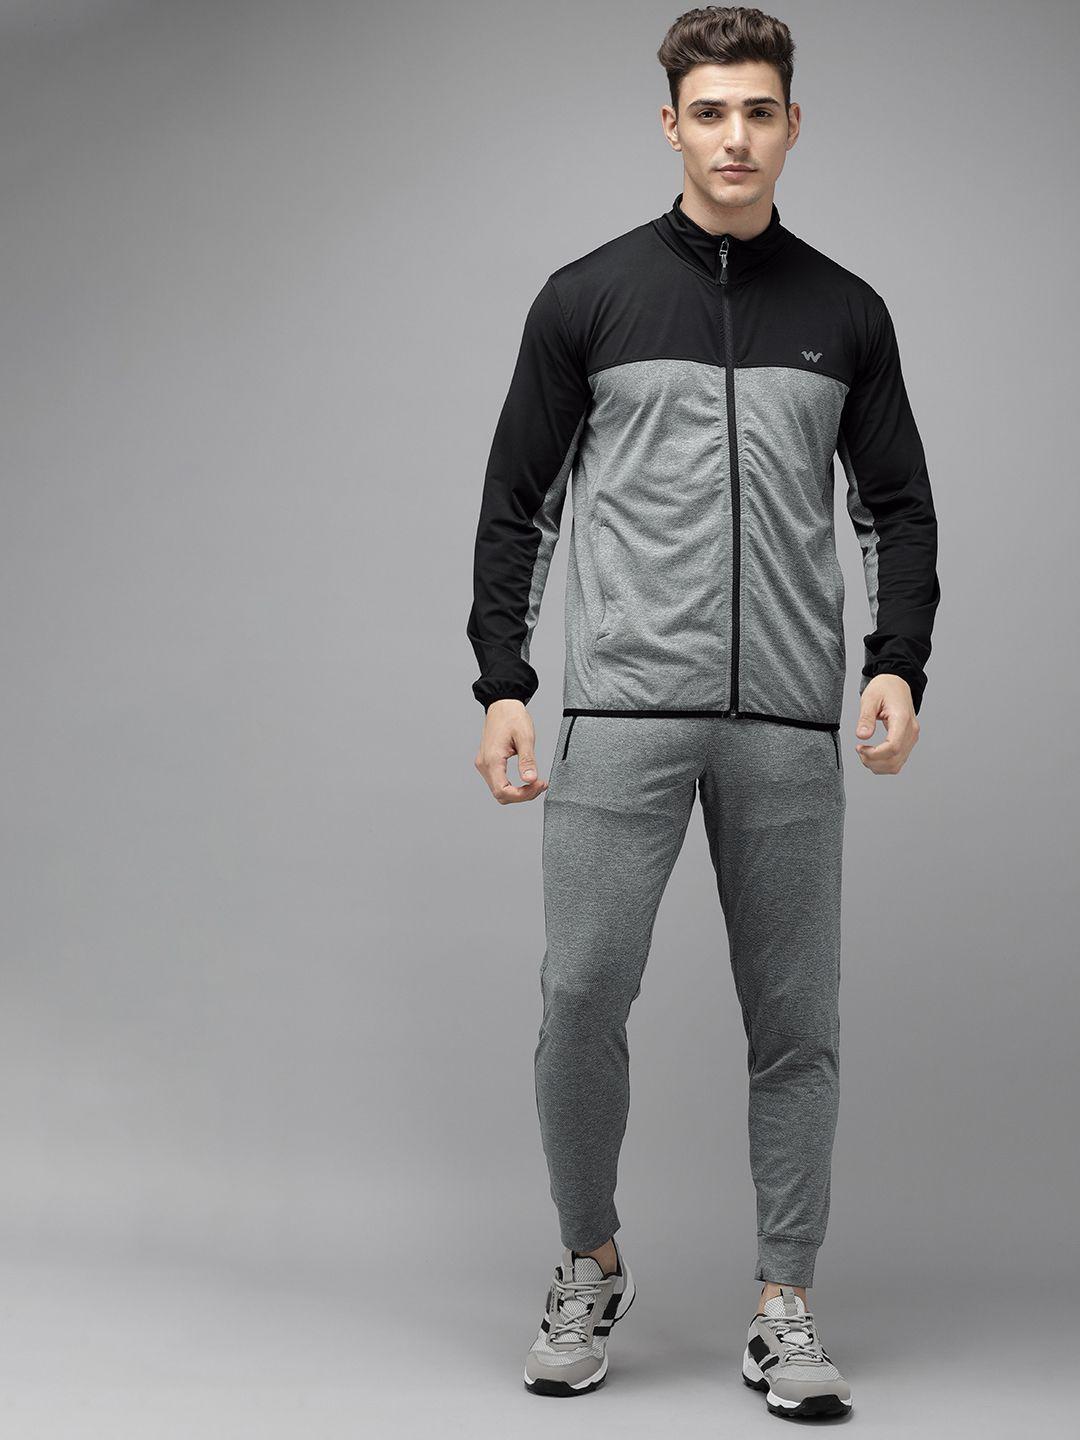 wildcraft colourblocked jacket and mid-rise joggers